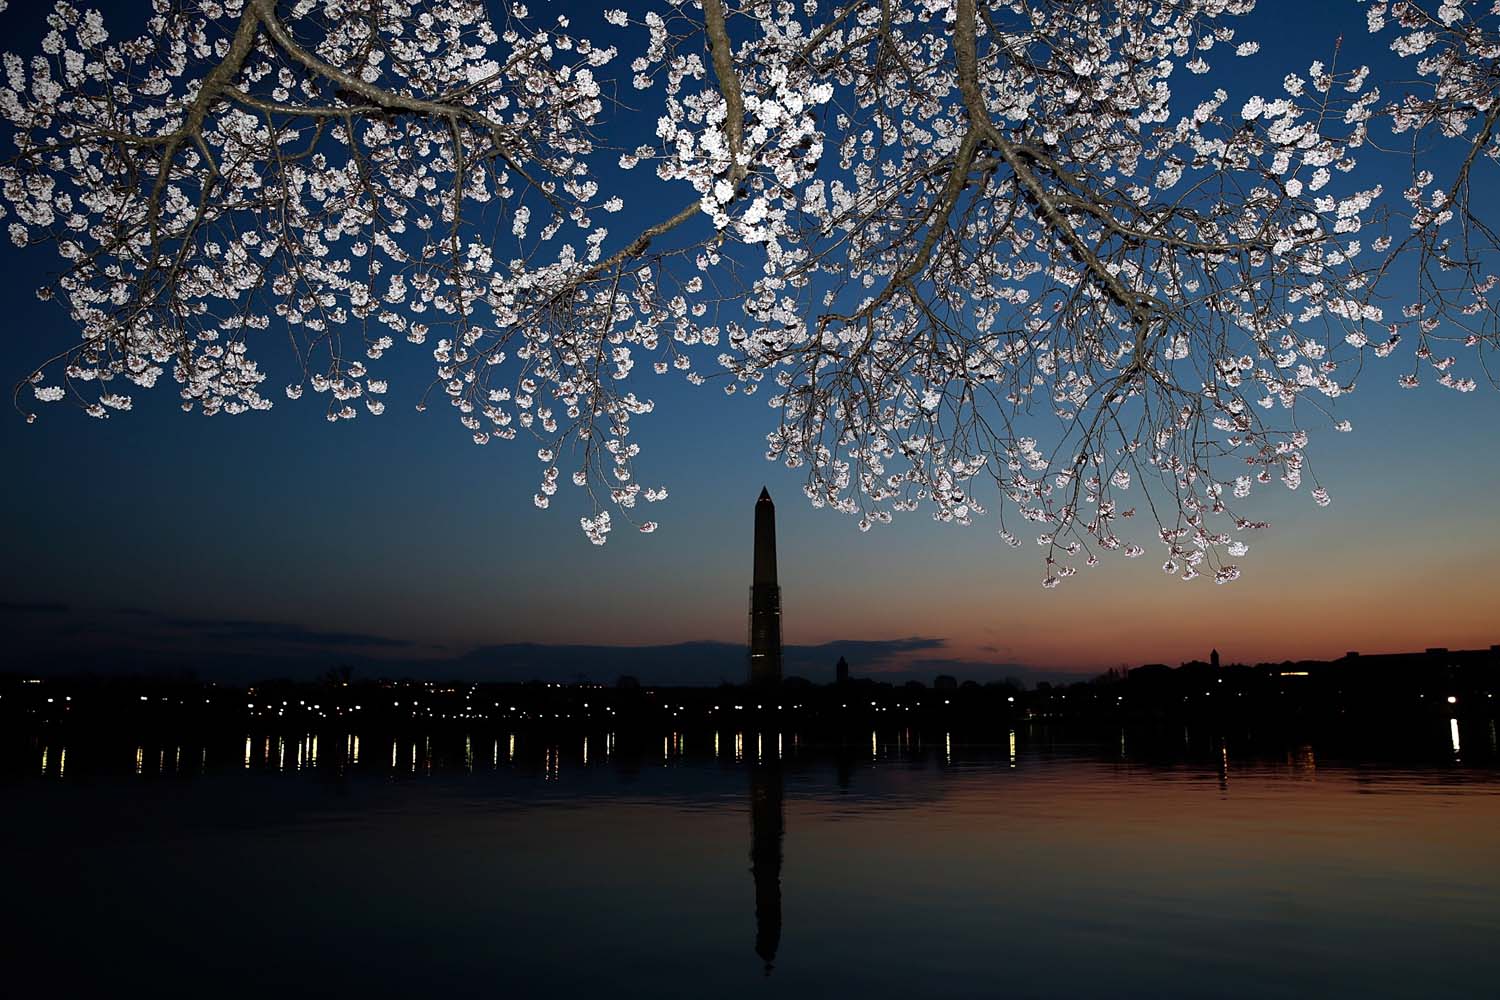 DC's Cherry Blossoms Come To Late Bloom